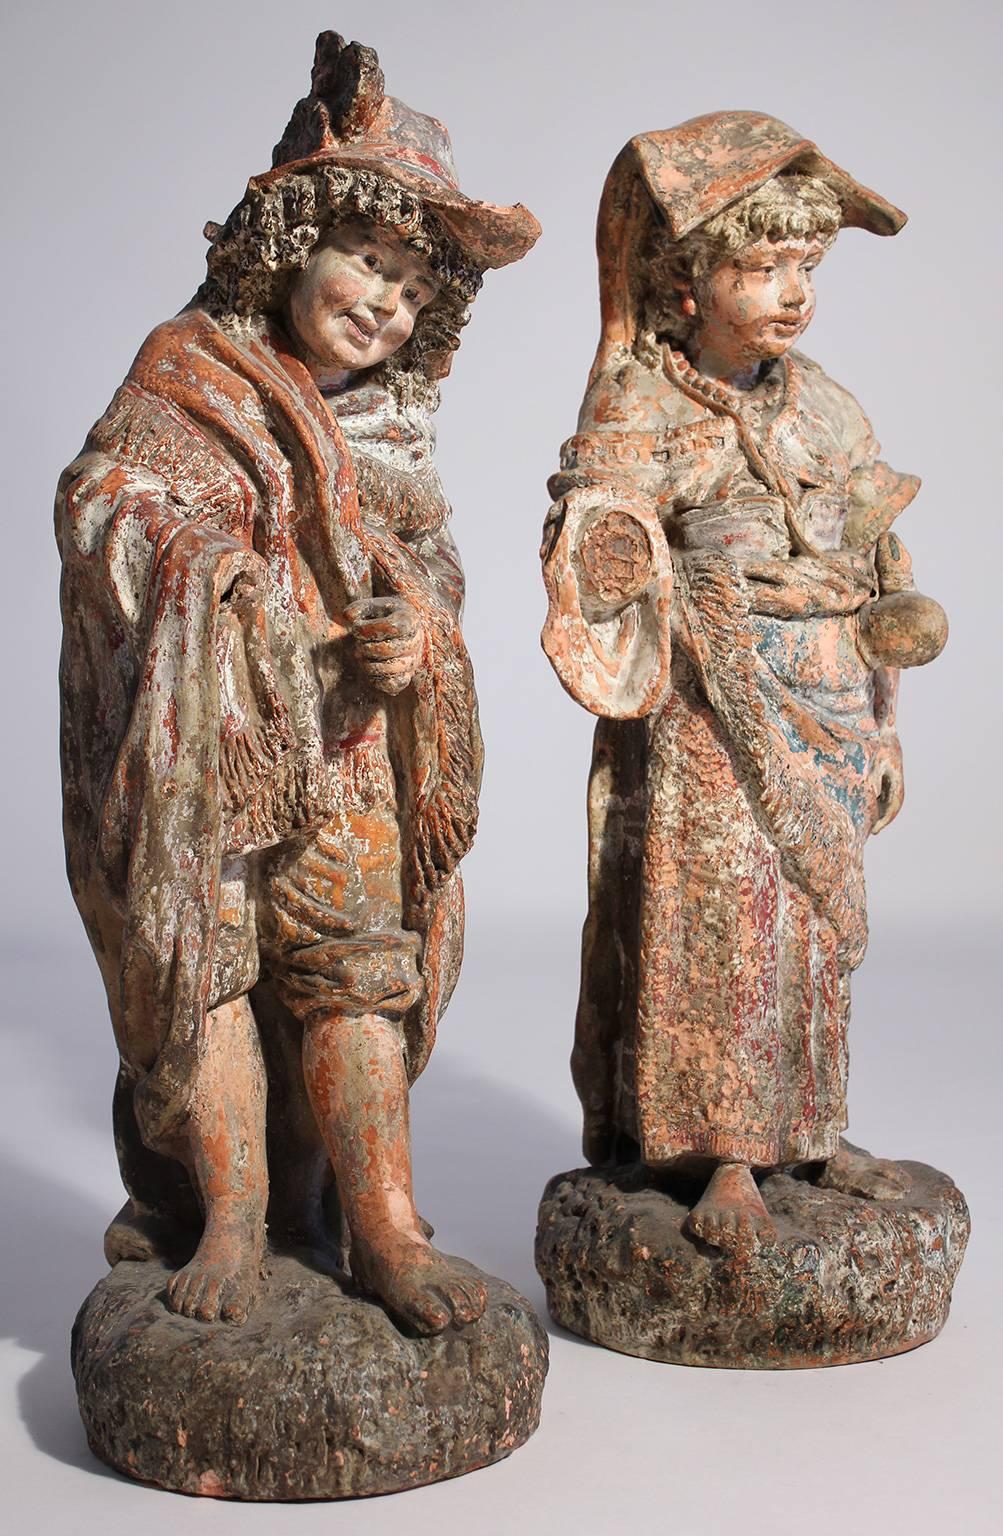 Wonderful pair of antique painted terracotta garden sculptures or figures with a perfectly aged and weathered patina. Each piece standing just over 2 feet tall.